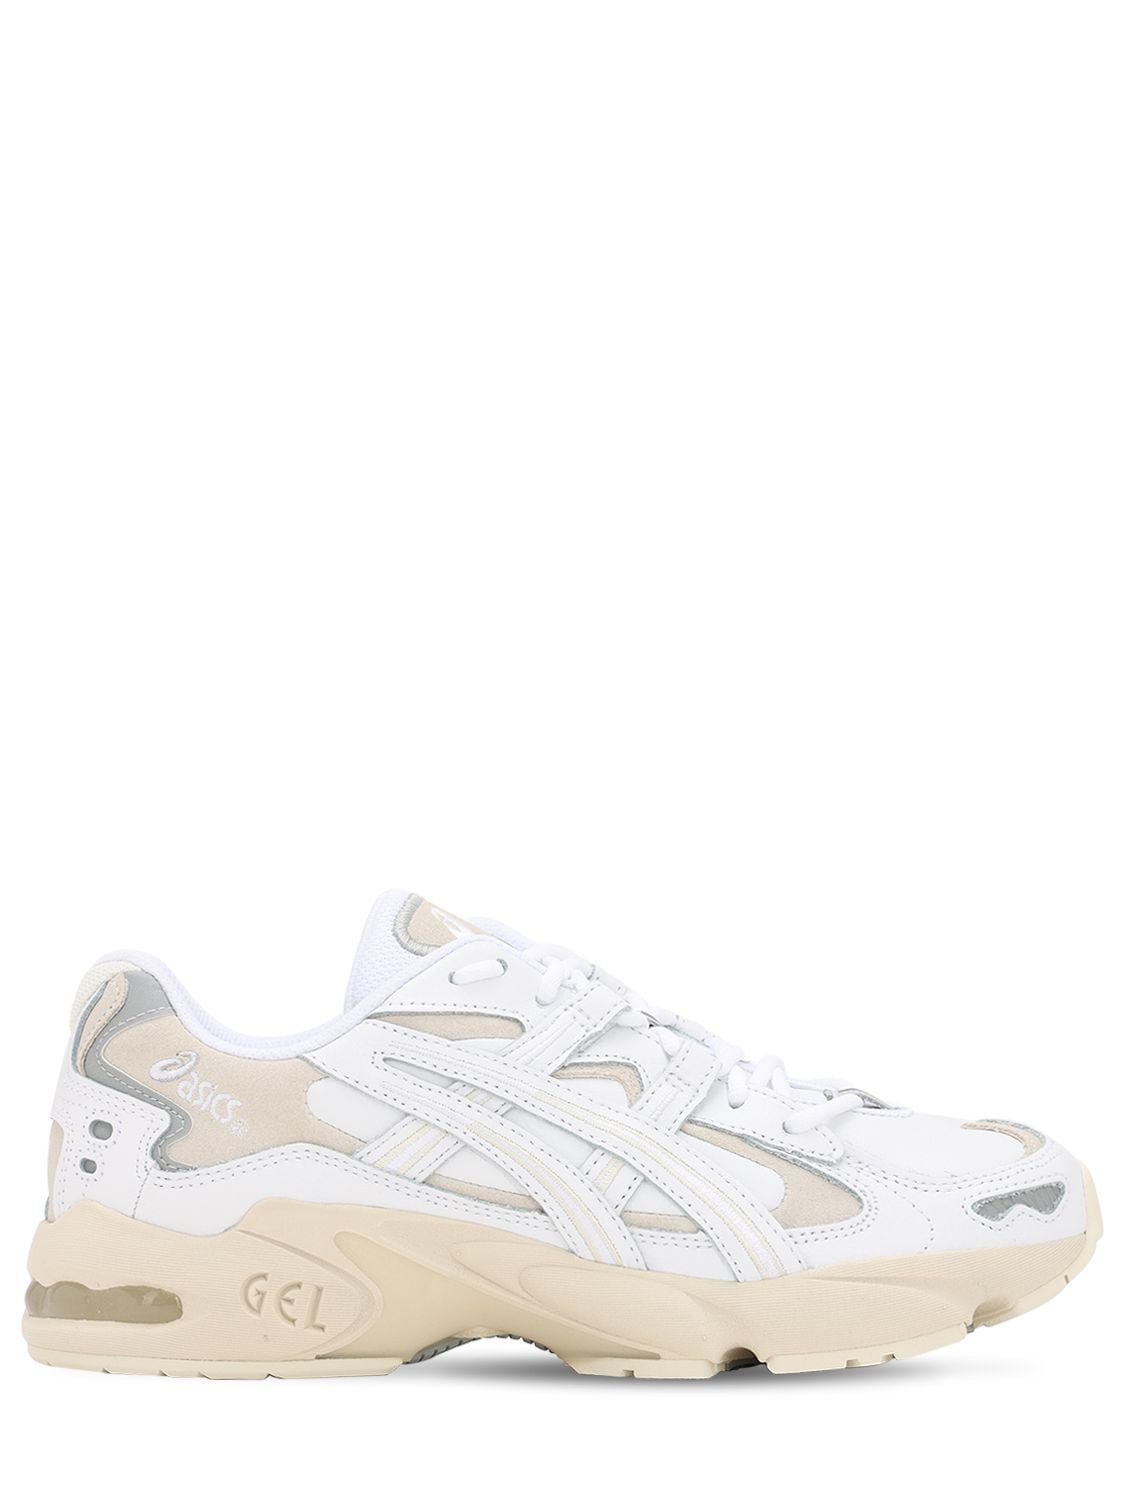 Asics Kayano 5 Og Leather & Suede Sneakers In White